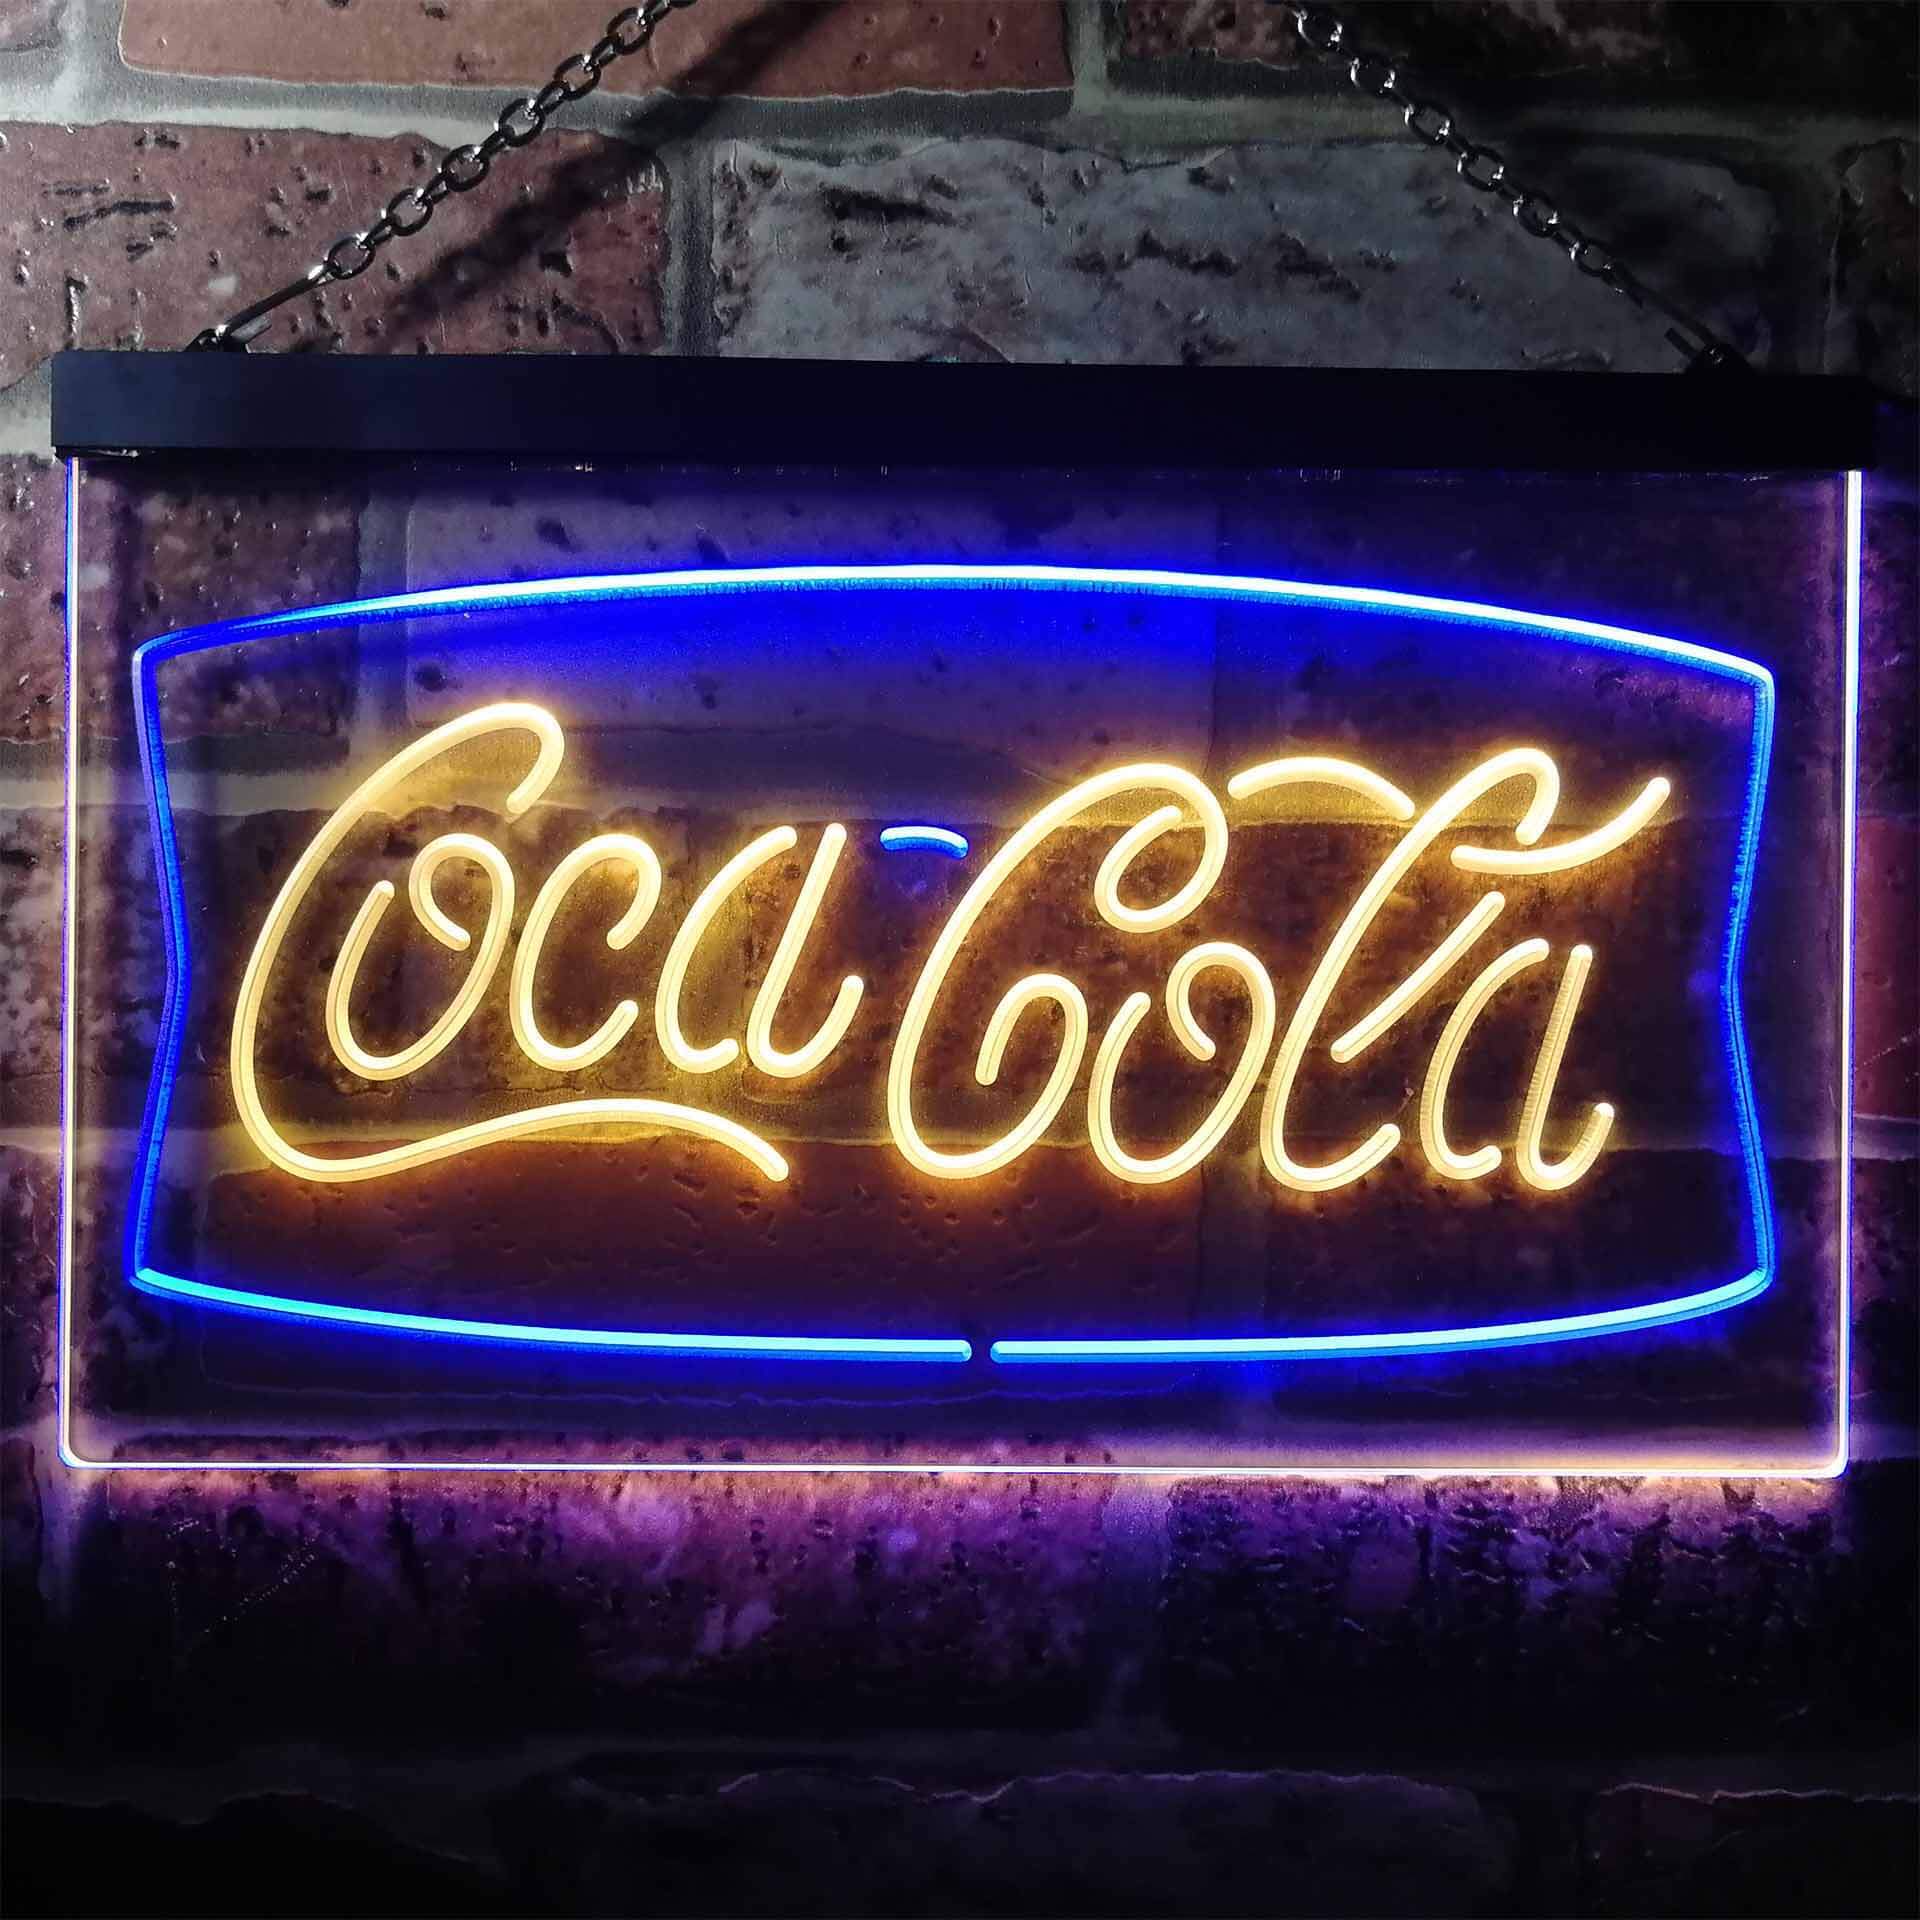 Dual-tone neon signs